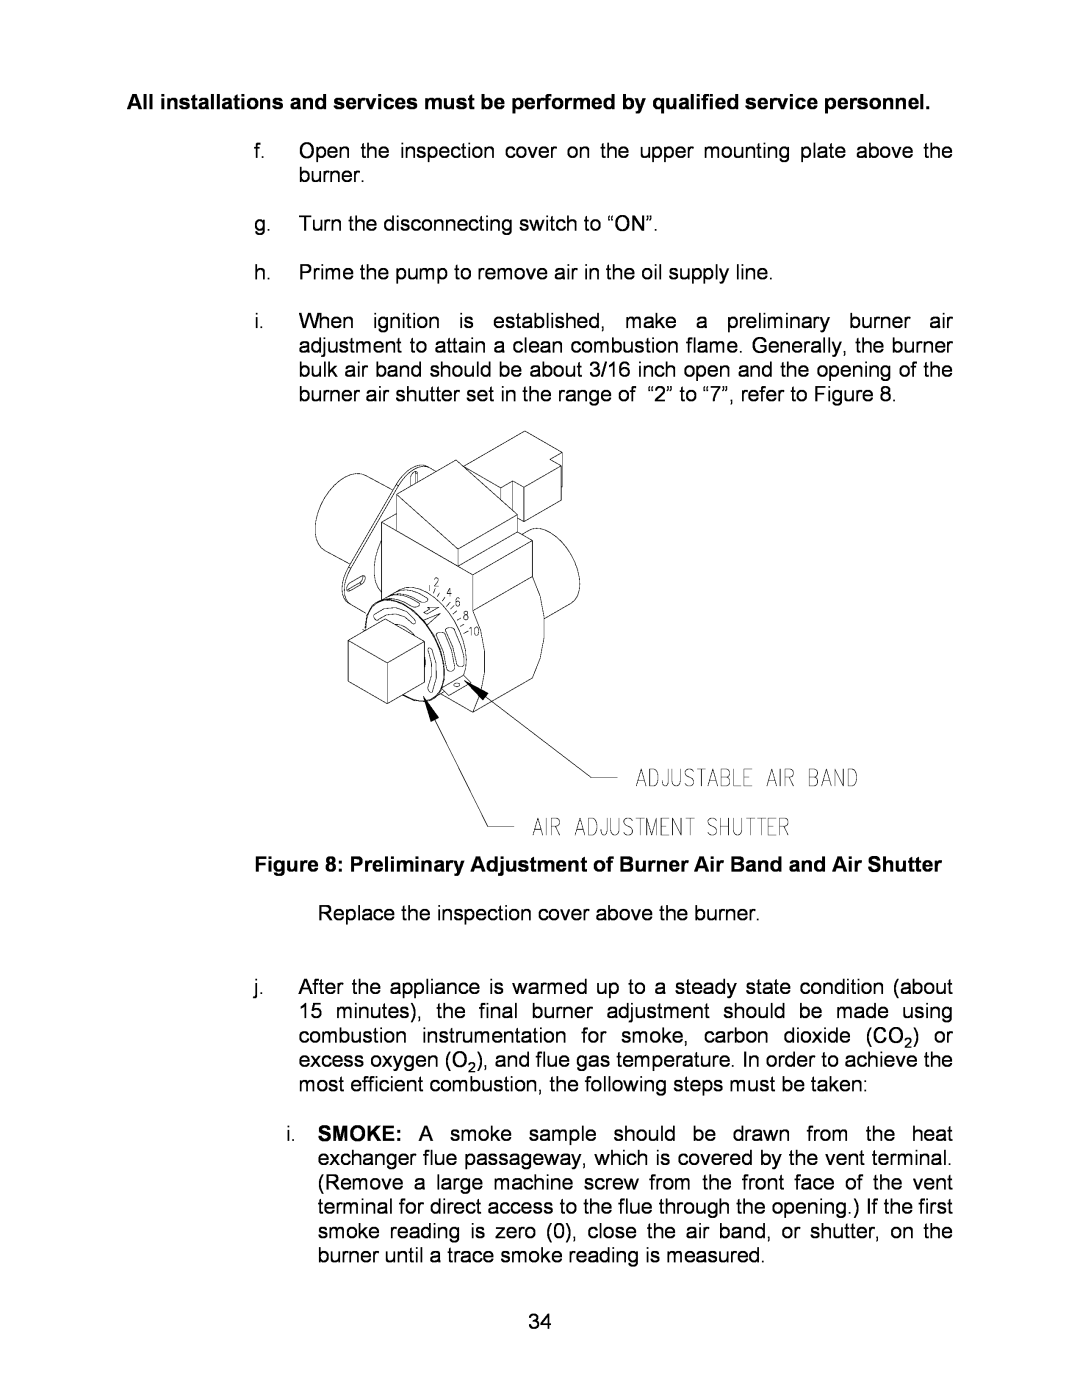 Thermo Products 30, OPB (24, 36)- 80 service manual g.Turn the disconnecting switch to “ON” 